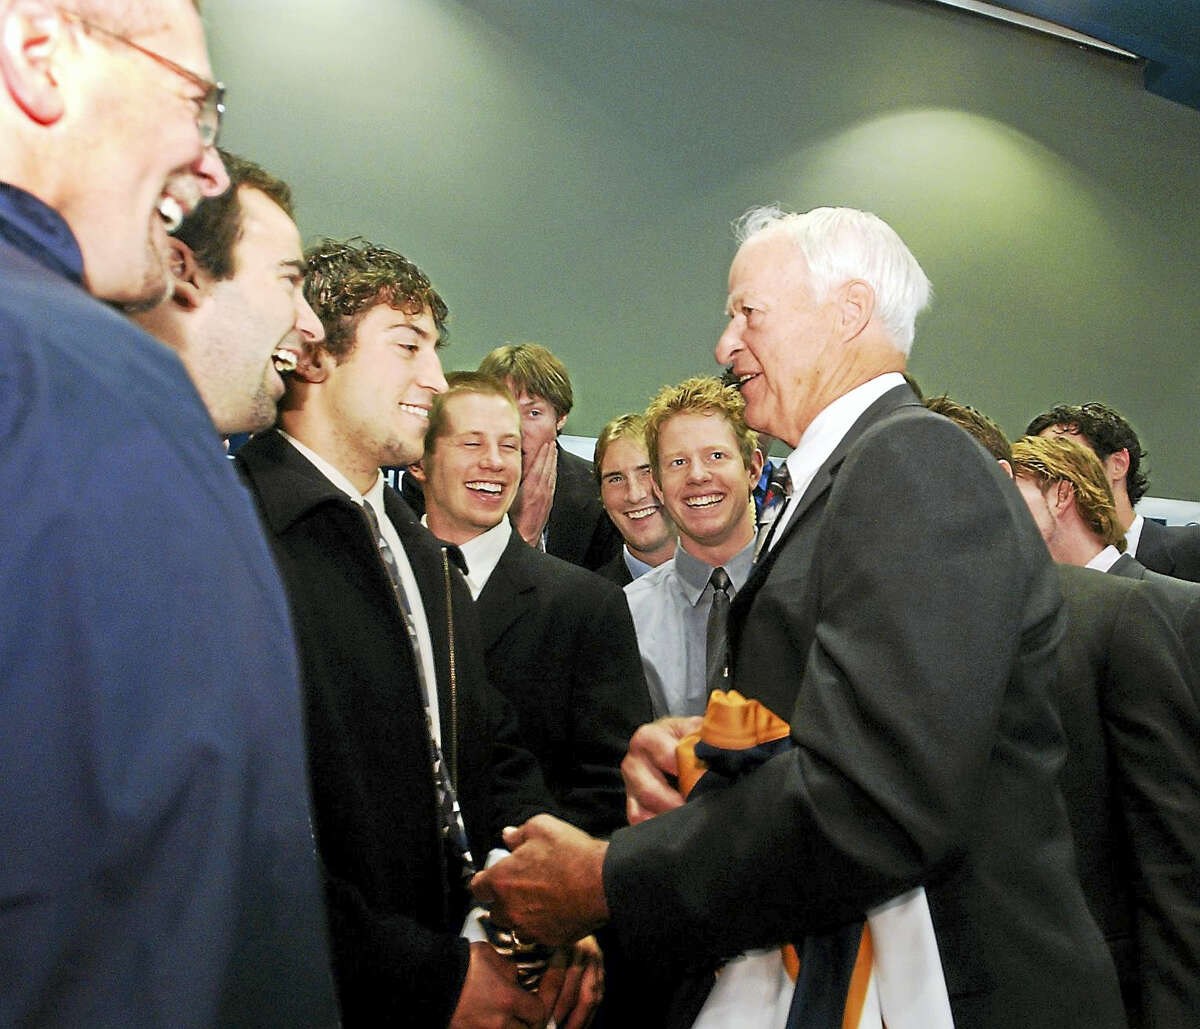 Hockey star Gordie Howe chats with the Quinnipiac hockey team after a press conference.